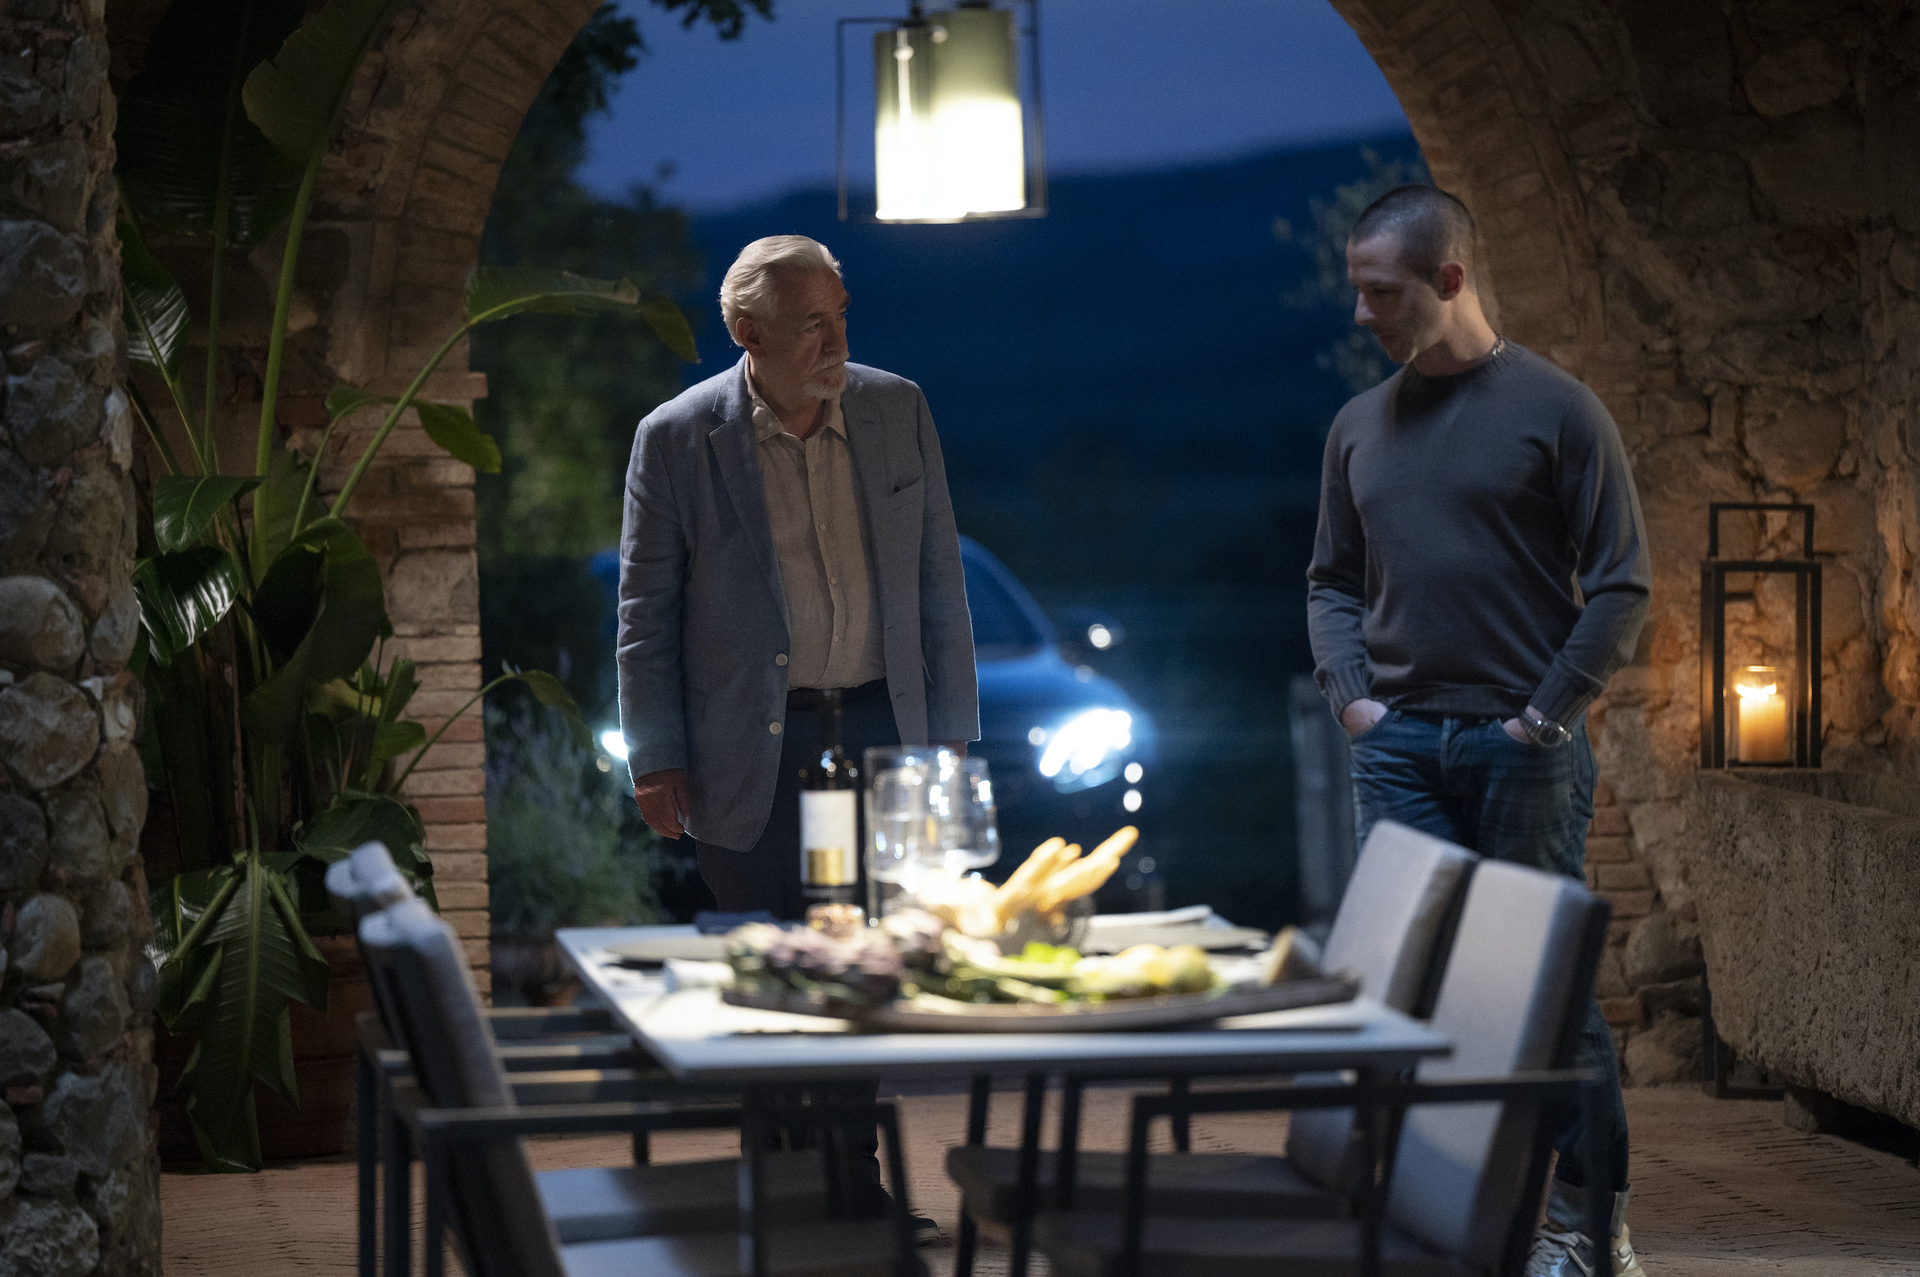 Logan (Brian Cox) and Kendall (Jeremy Strong) gather around a table in the Italian night. 